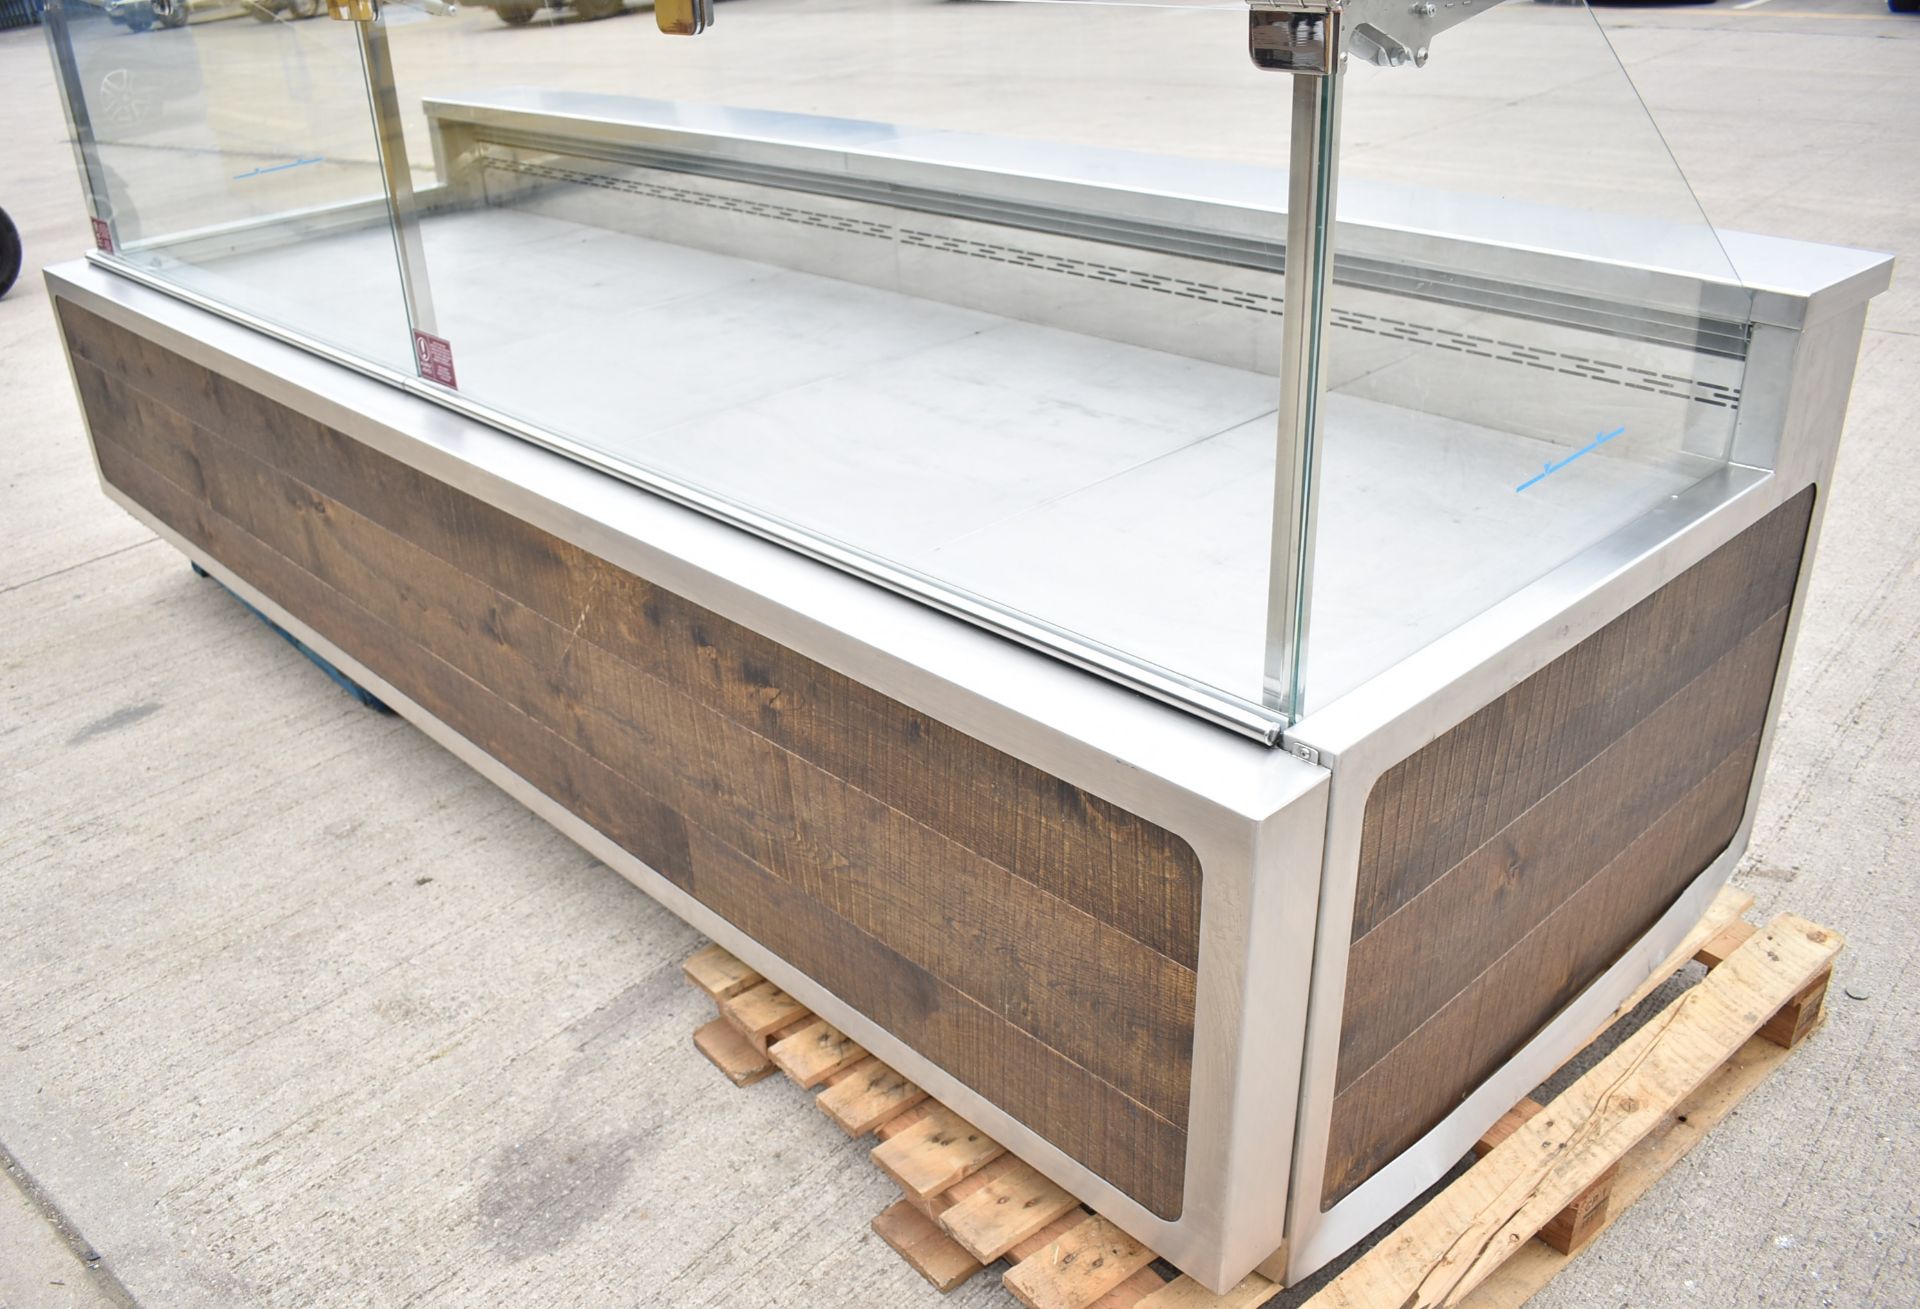 1 x Eurocryor Bistro Refrigerated Retail Counter - Suitable For Takeaways, Butchers, Deli, Cake - Image 13 of 28